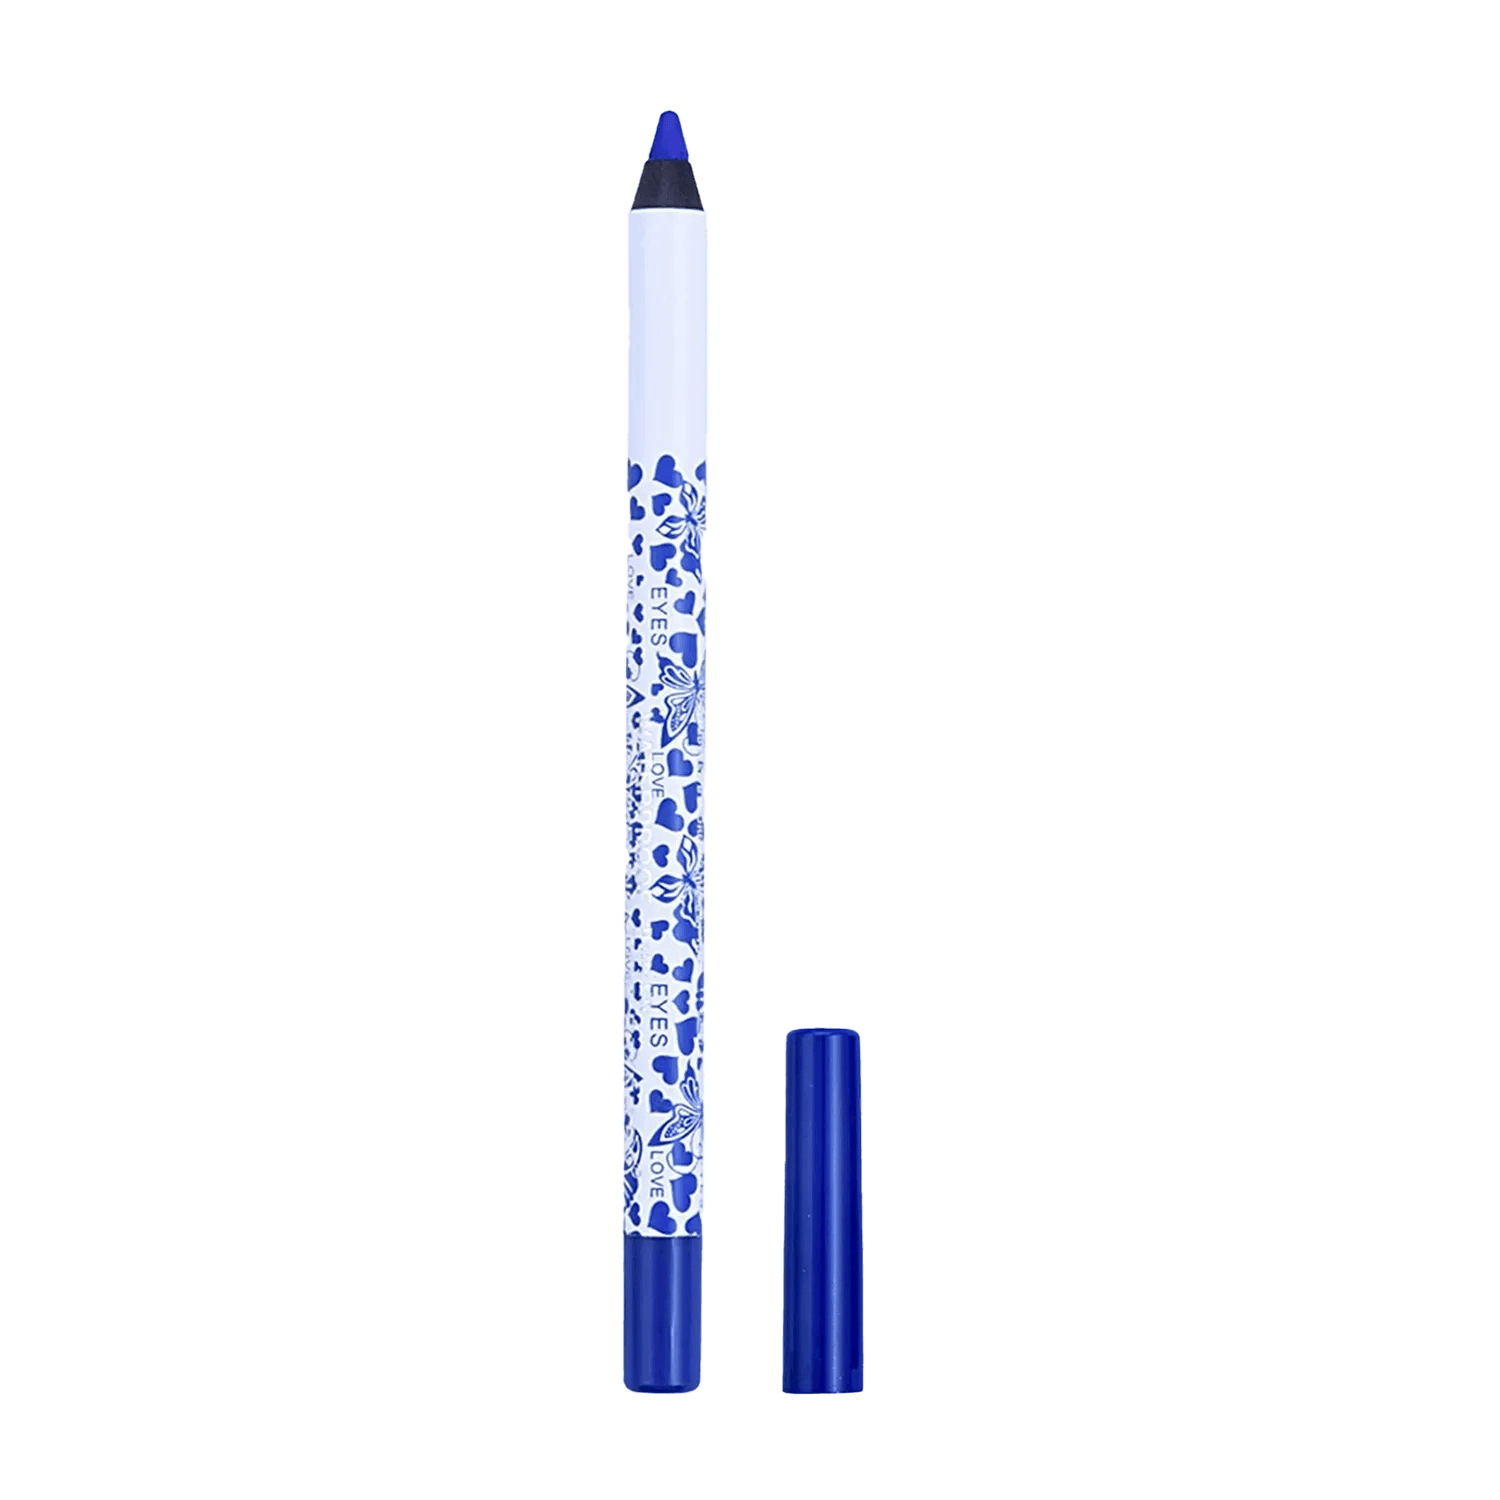 Daily Life Forever52 | Daily Life Forever52 Waterproof Smoothening Eye Pencil Lead F517 (1gm)